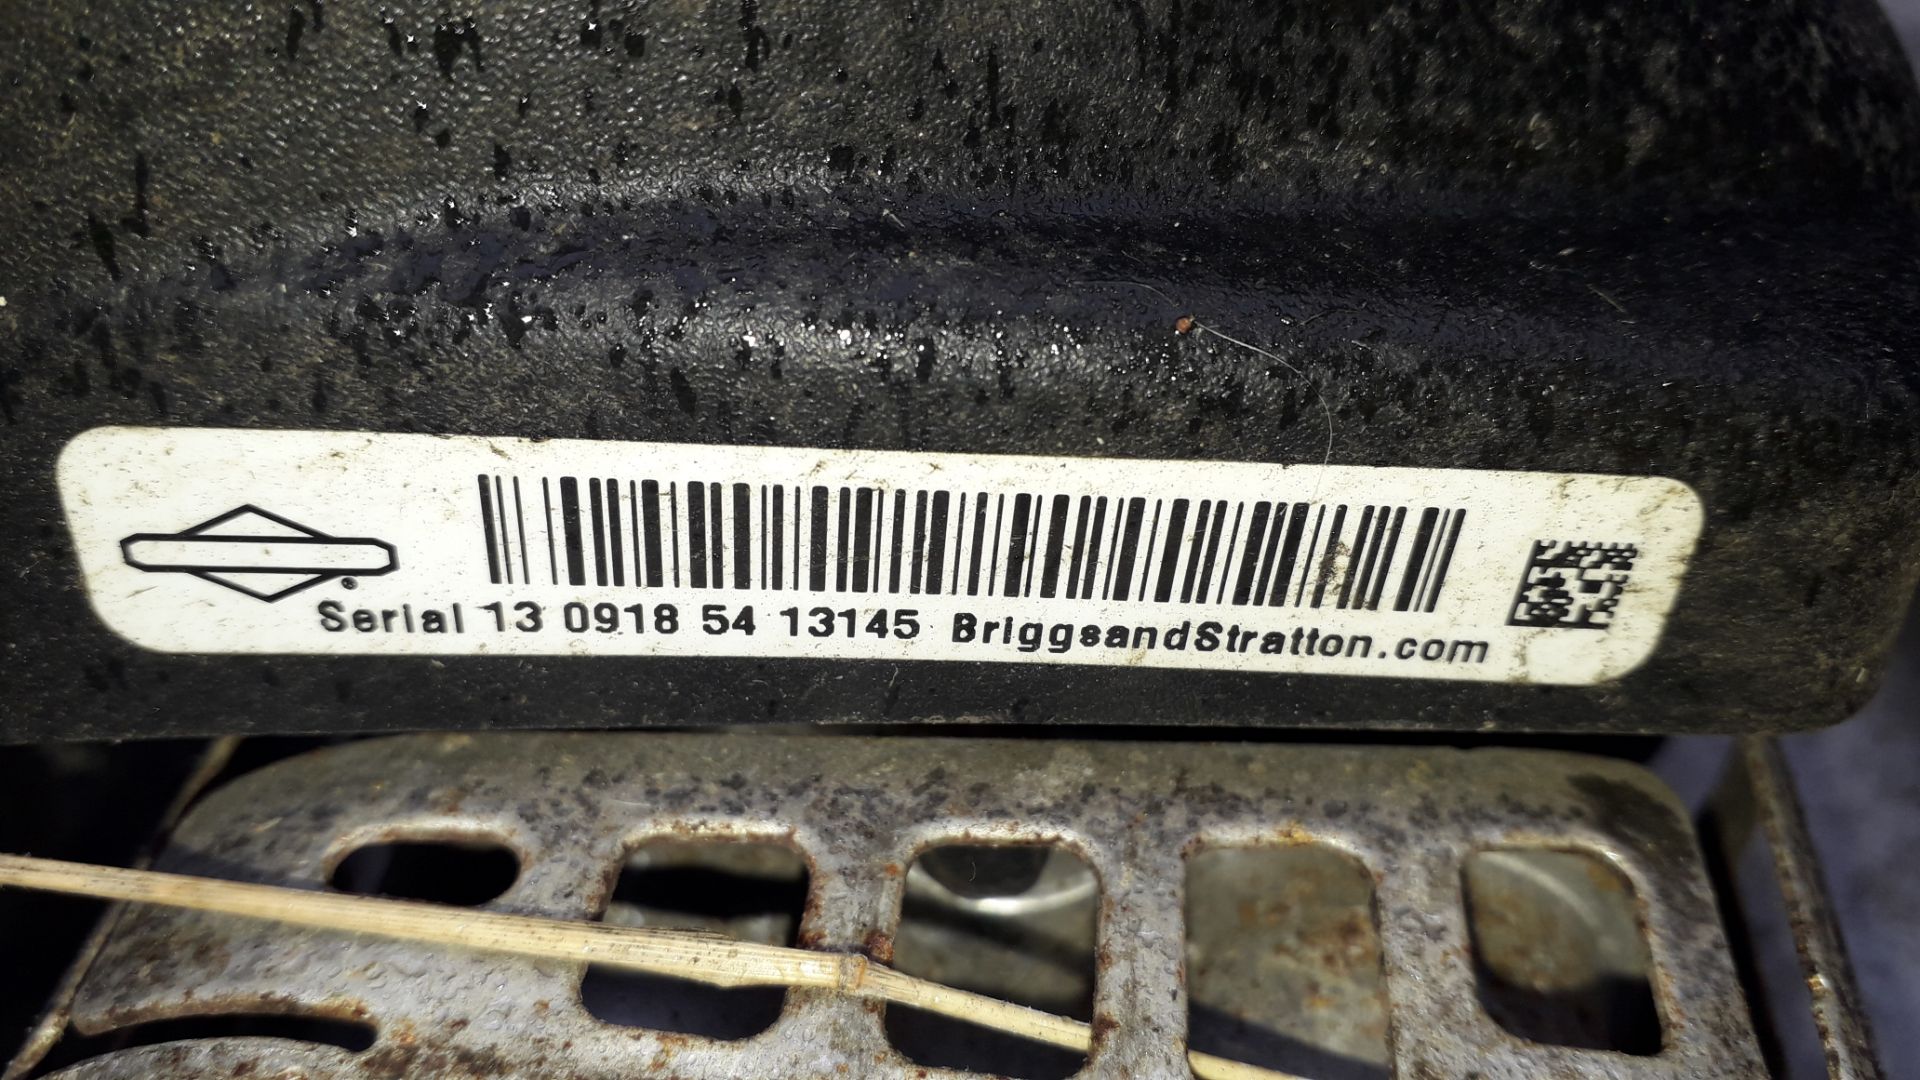 Briggs & Stratton 450E Series Reciprocating Mower, Serial Number 1309185413145 - Image 4 of 4